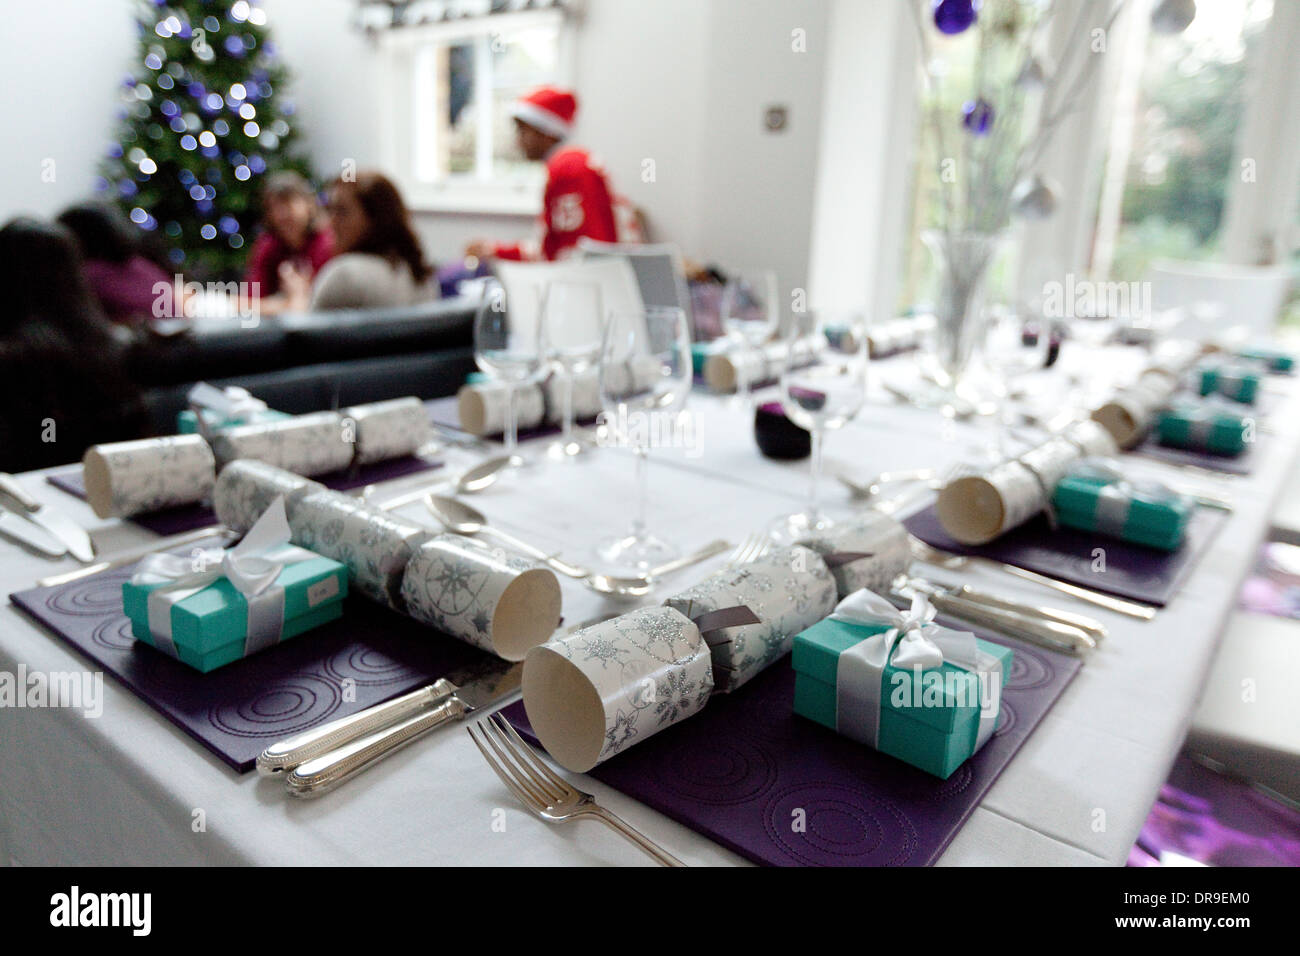 Christmas Dinner table set for christmas with decorations and crackers in a UK house, UK Stock Photo